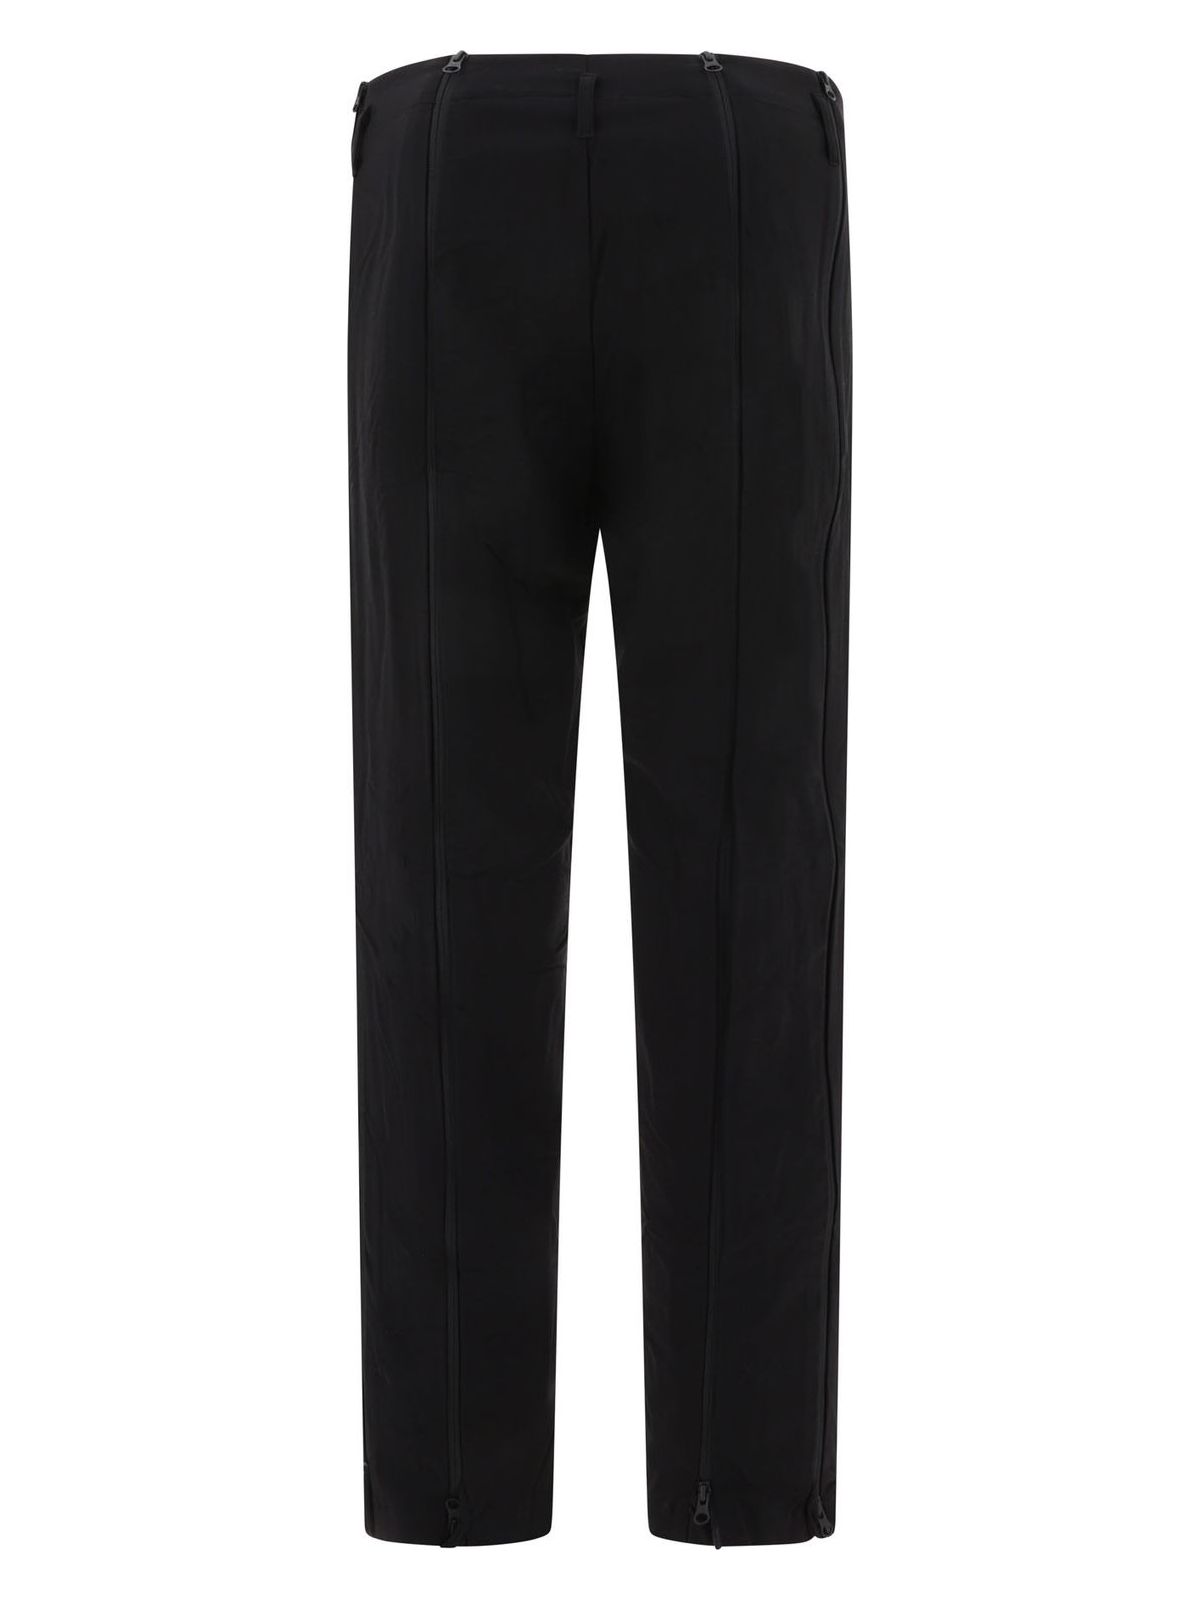 Black POST ARCHIVE FACTION (PAF) "5.1 CENTER" TROUSERS